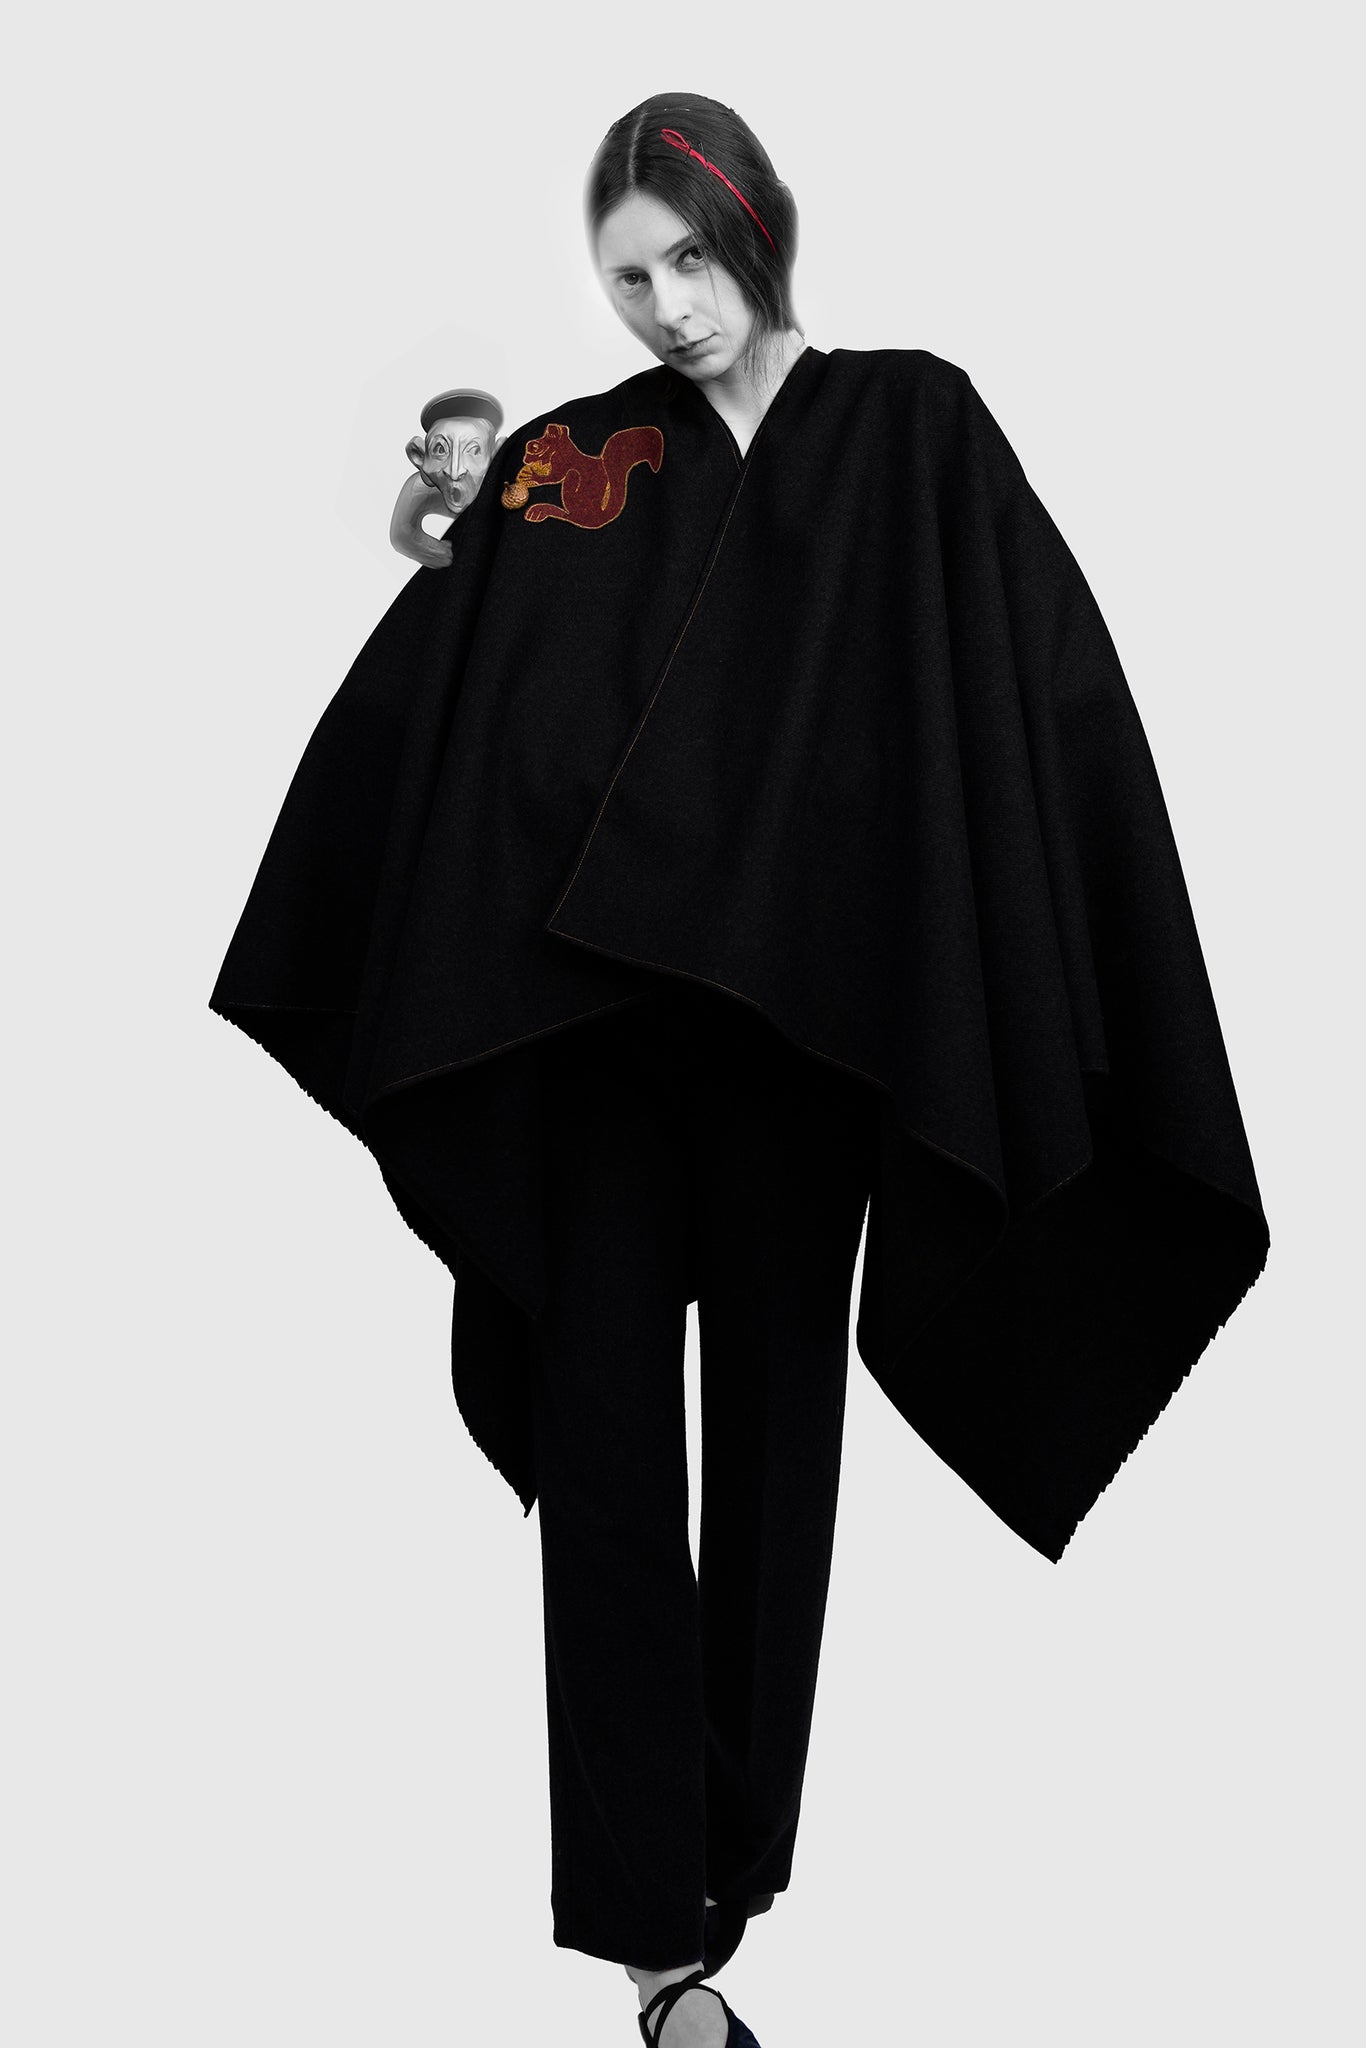 autumn winter cape, black virgin wool, great to style your outfit, keeping warm, soft wool